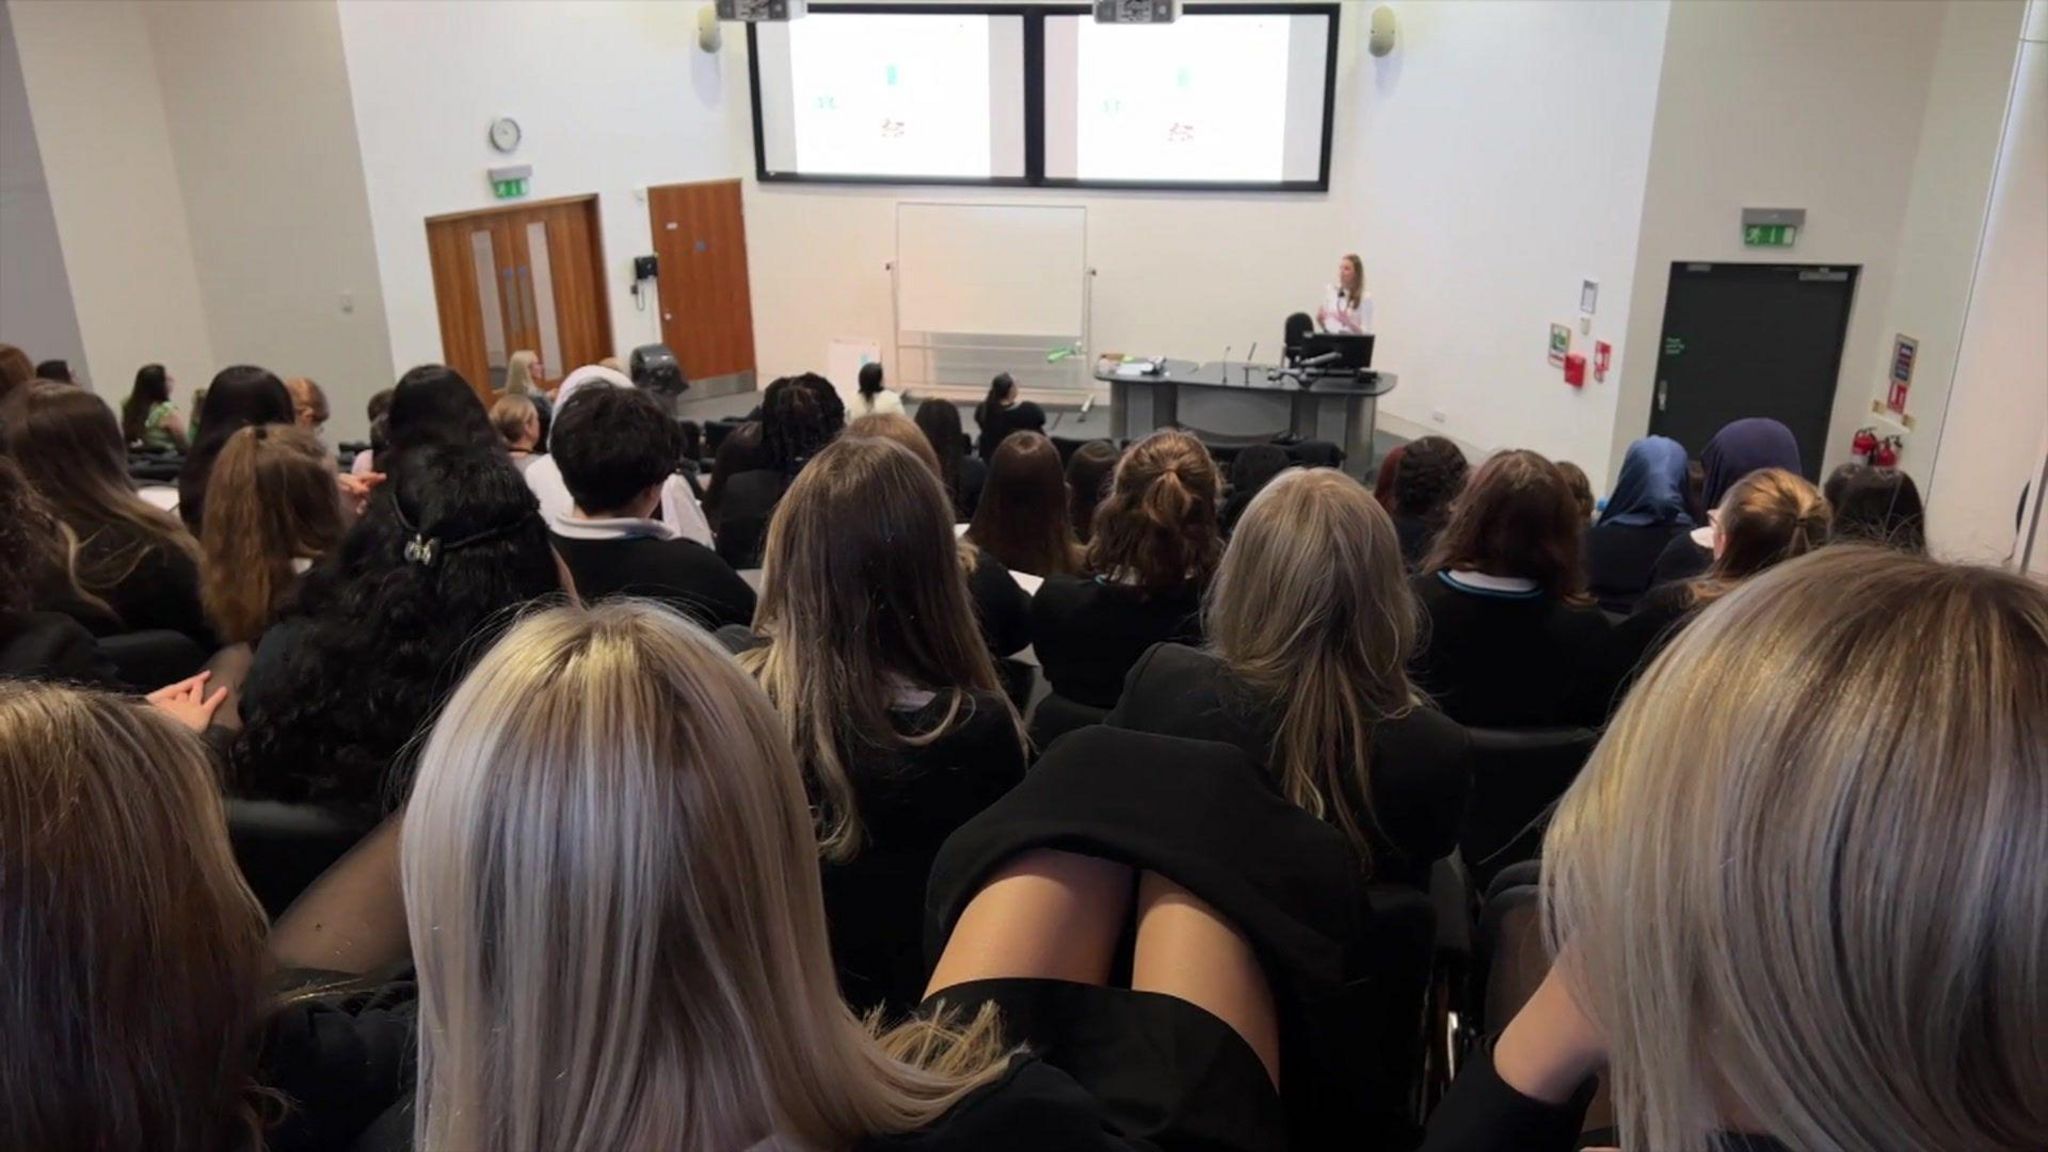 Around 30 young female school students sitting in a lecture theatre listening to a talk from a middle-aged woman